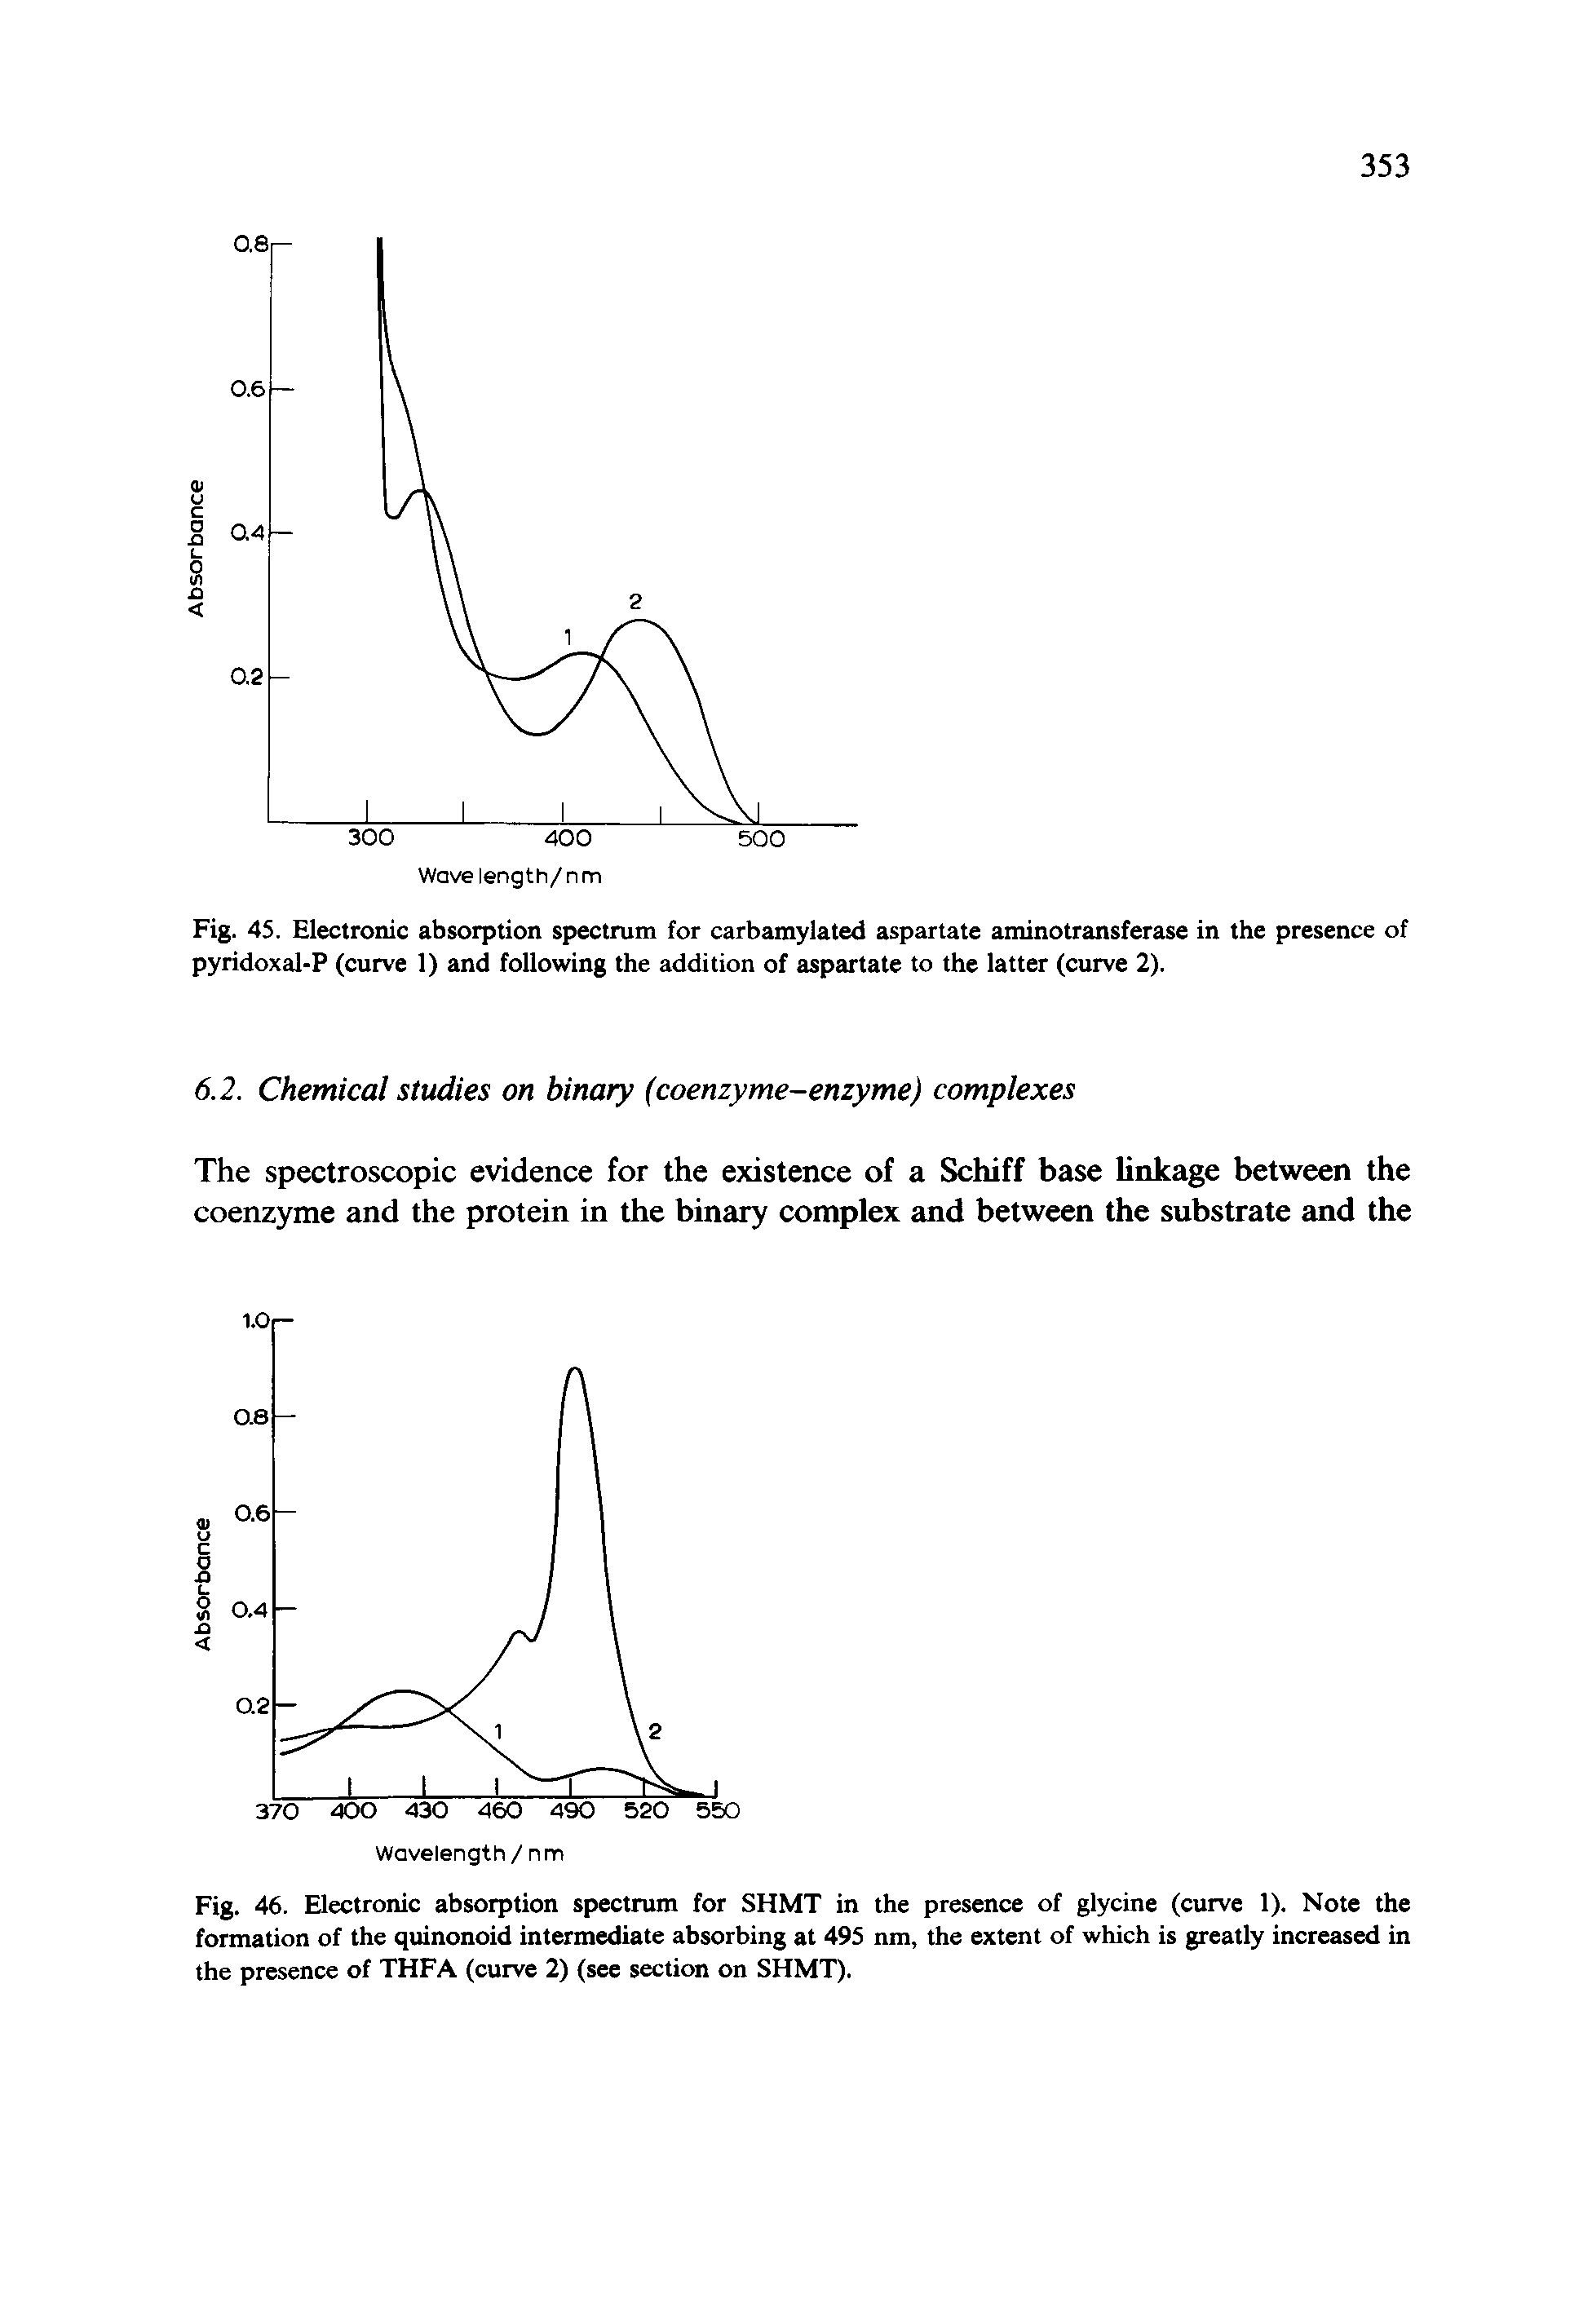 Fig. 45. Electronic absorption spectrum for carbamylated aspartate aminotransferase in the presence of pyridoxal-P (curve 1) and following the addition of aspartate to the latter (curve 2).